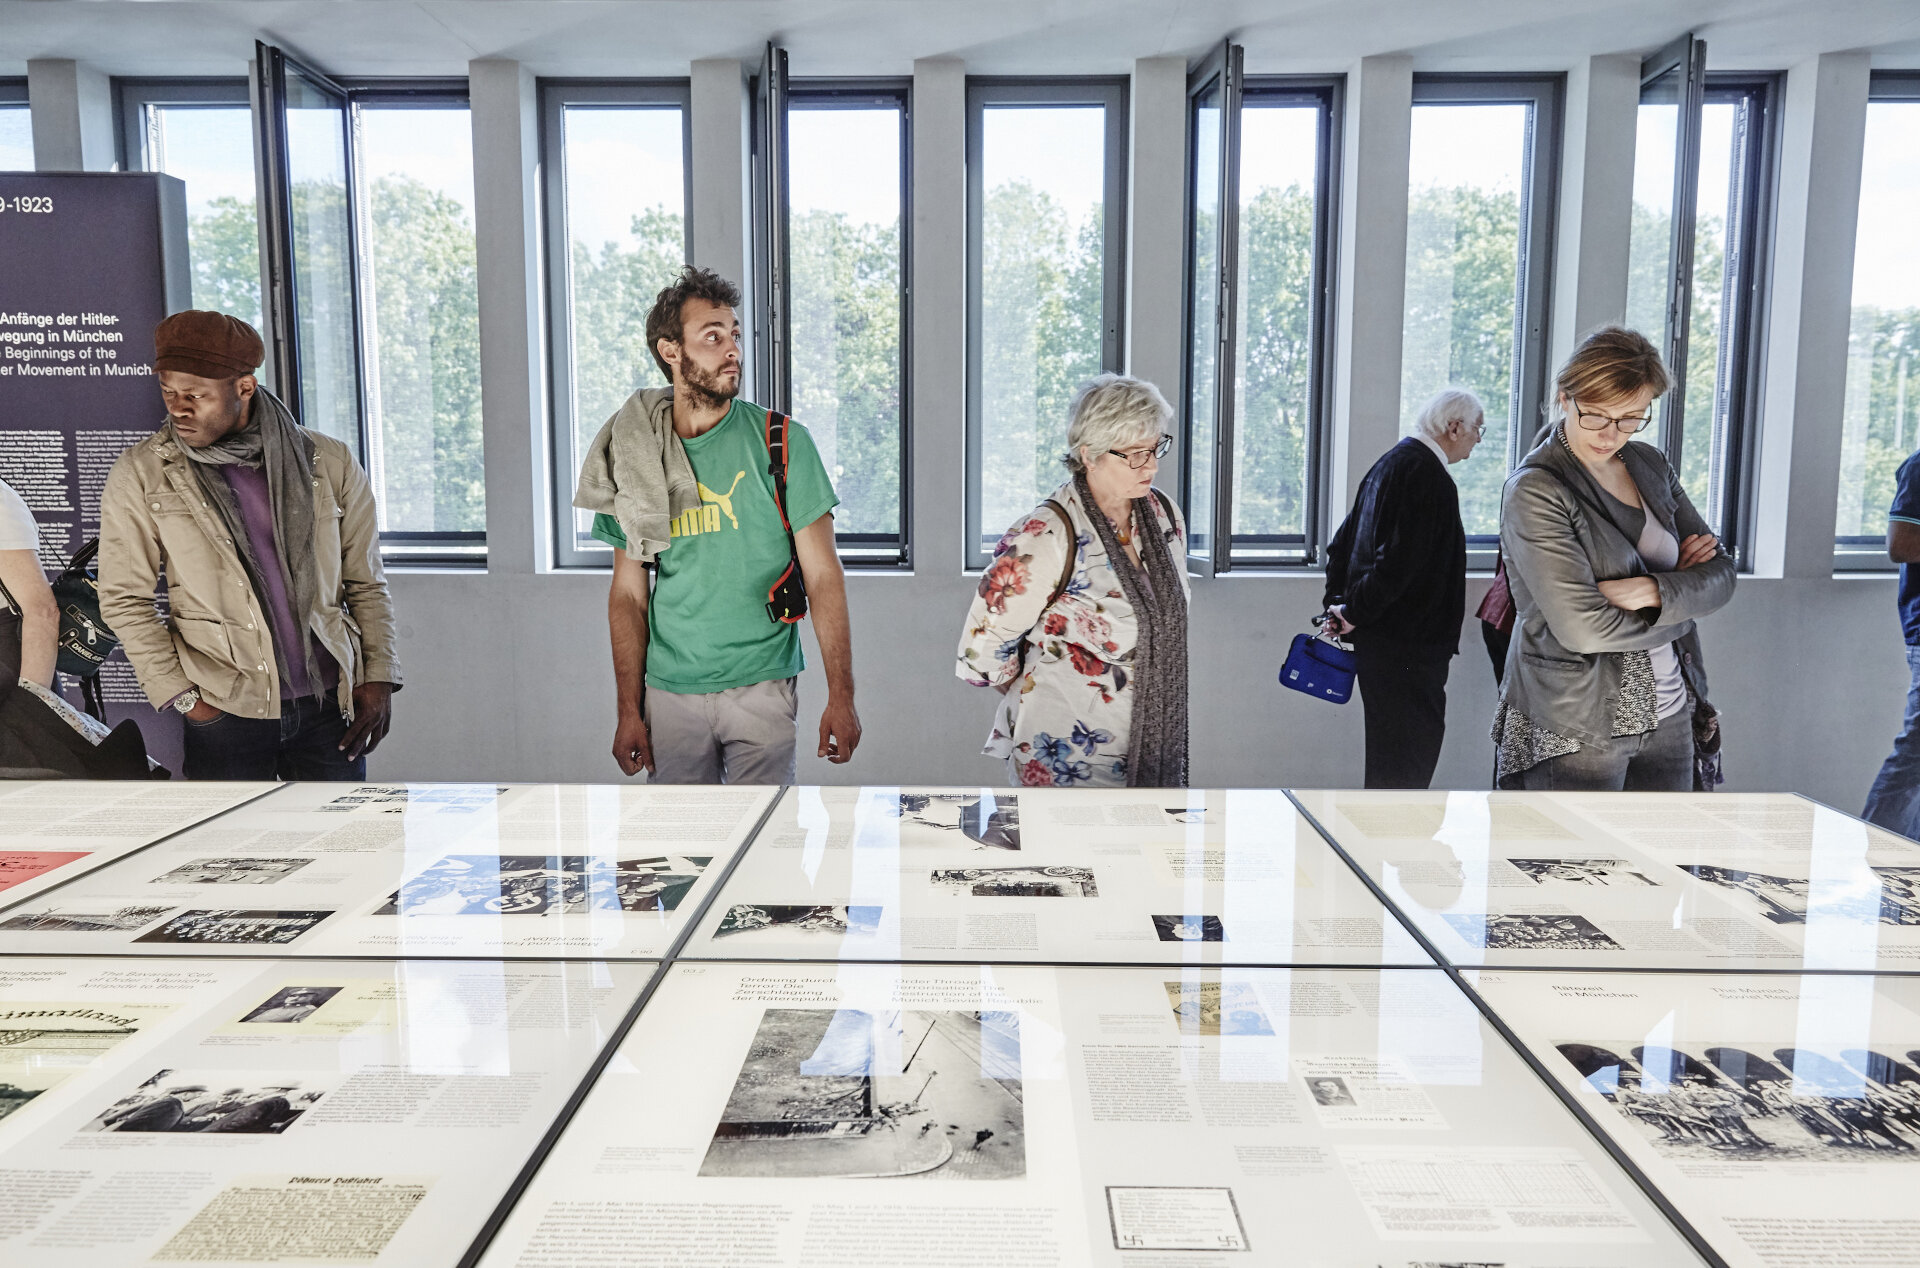 People looking at a table with exhibition texts, photos, and documents.